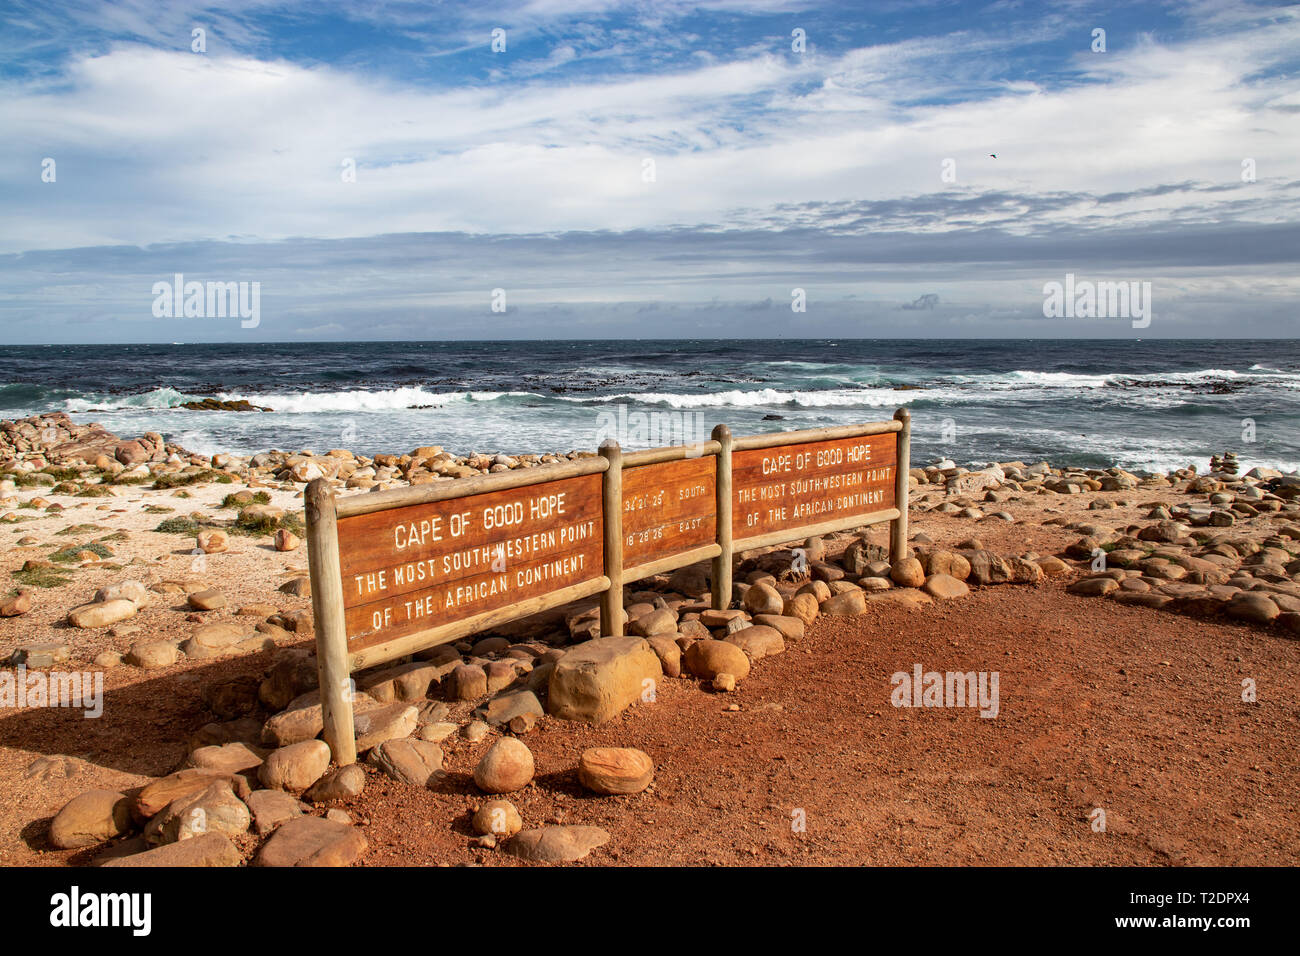 Cape of good hope sign with the geographical coordinates Stock Photo